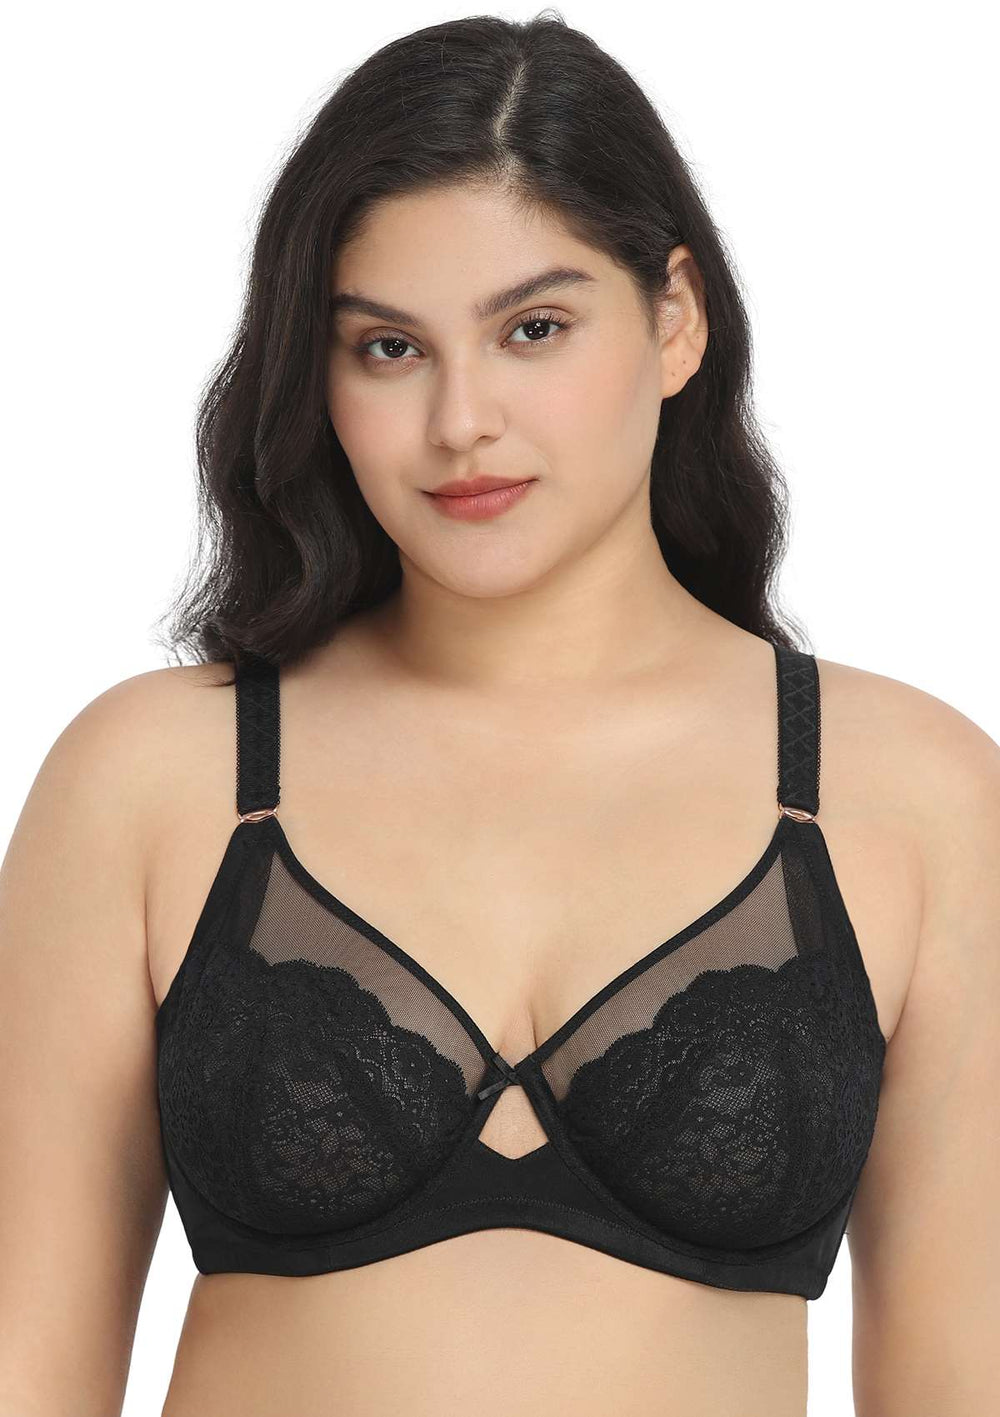 Buy HSIA Minimizer Unlined Bra for Woman Underwire Lace Full